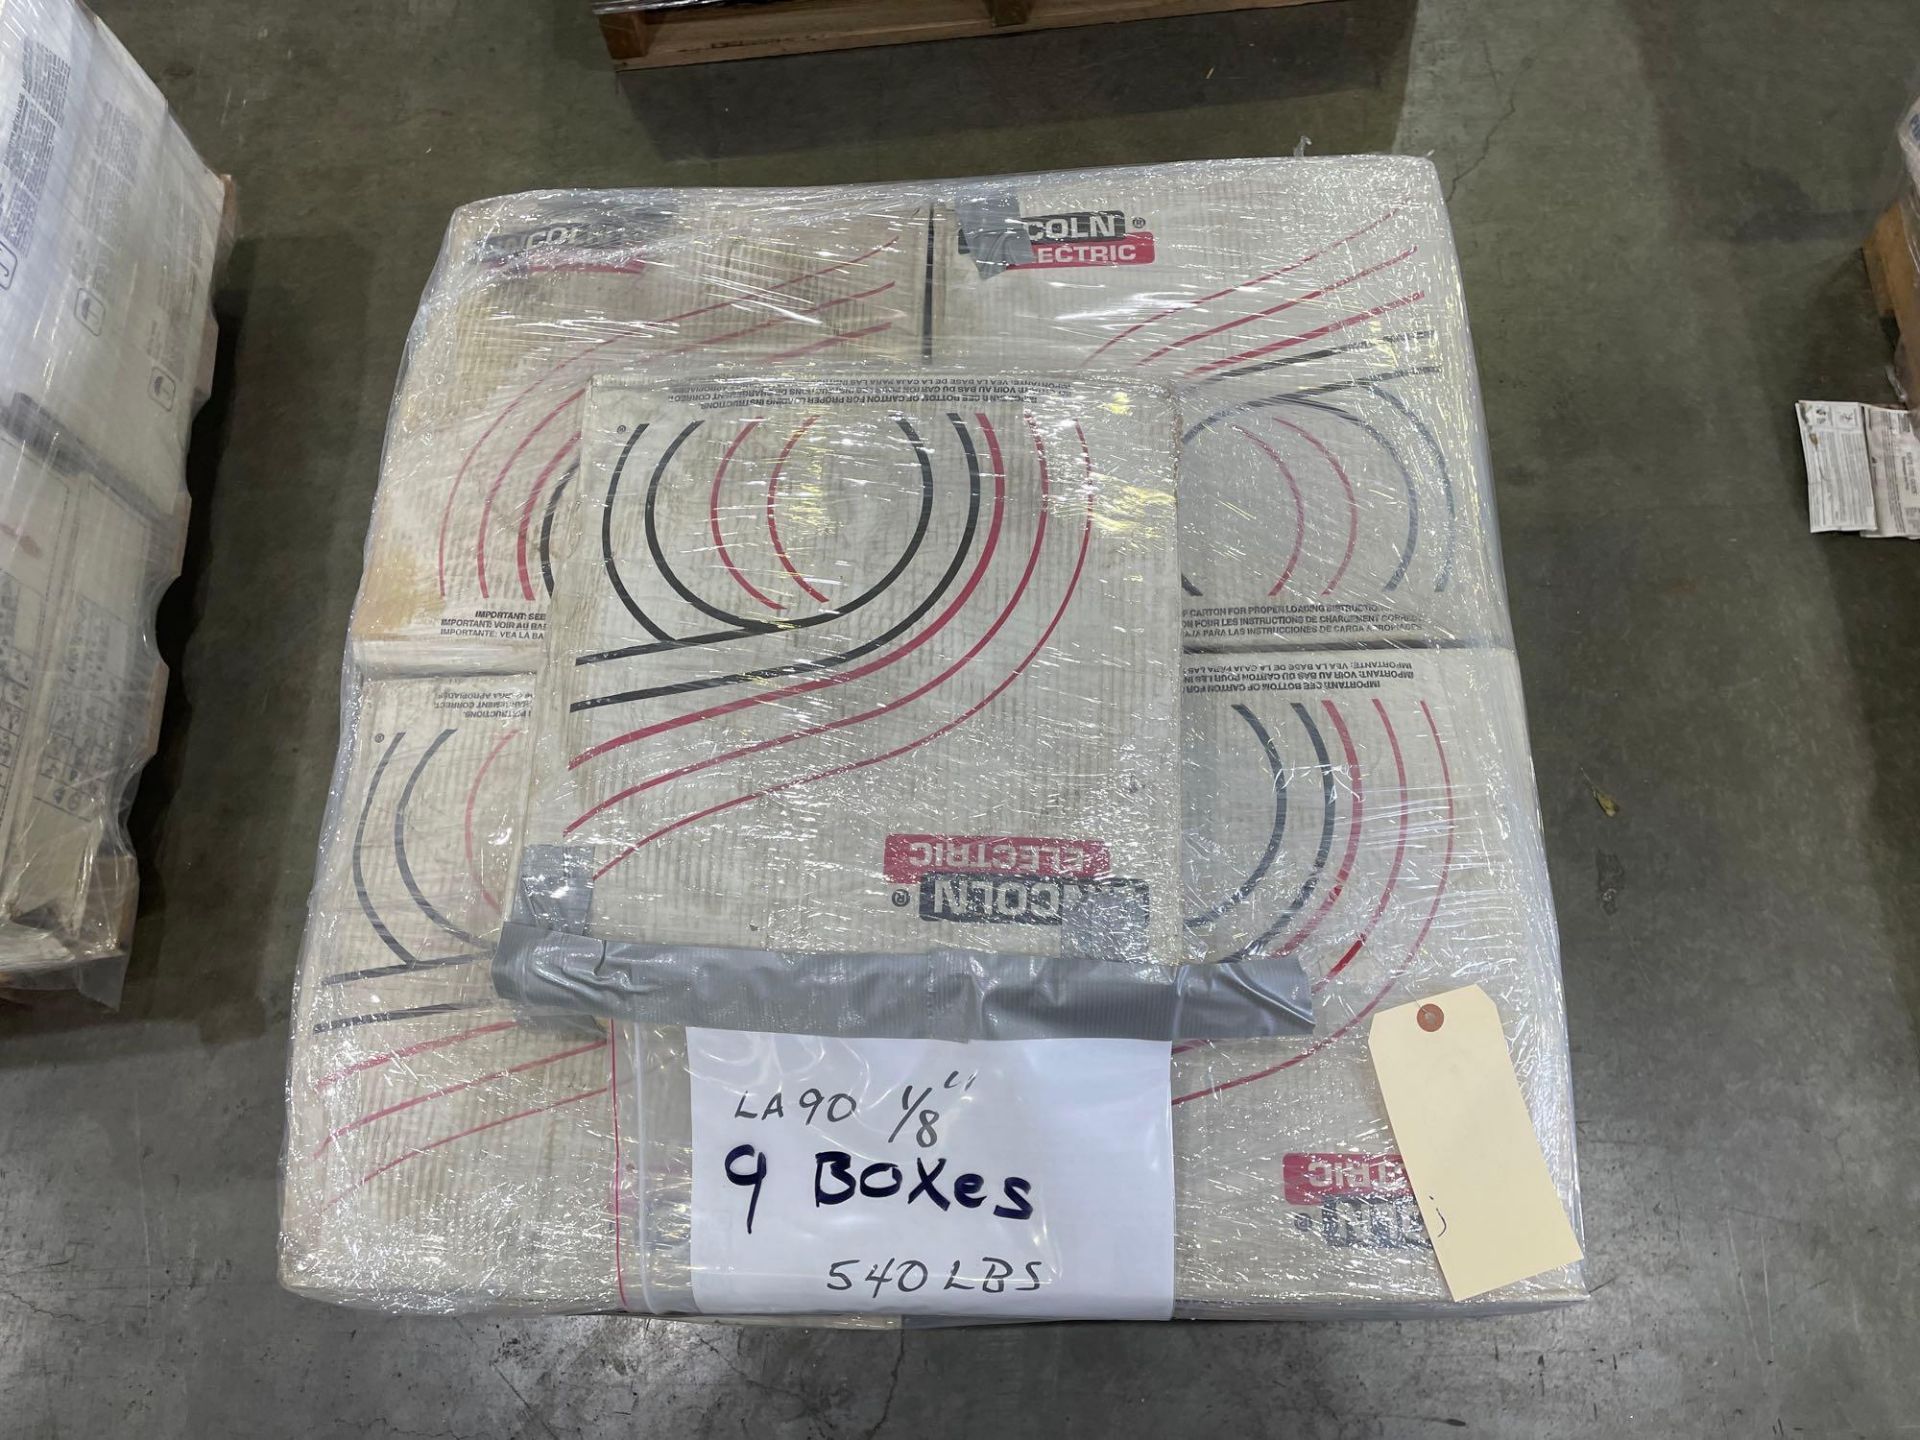 9 Boxes of Lincoln Electric LA90 1/8” Welding Wire - Image 2 of 4